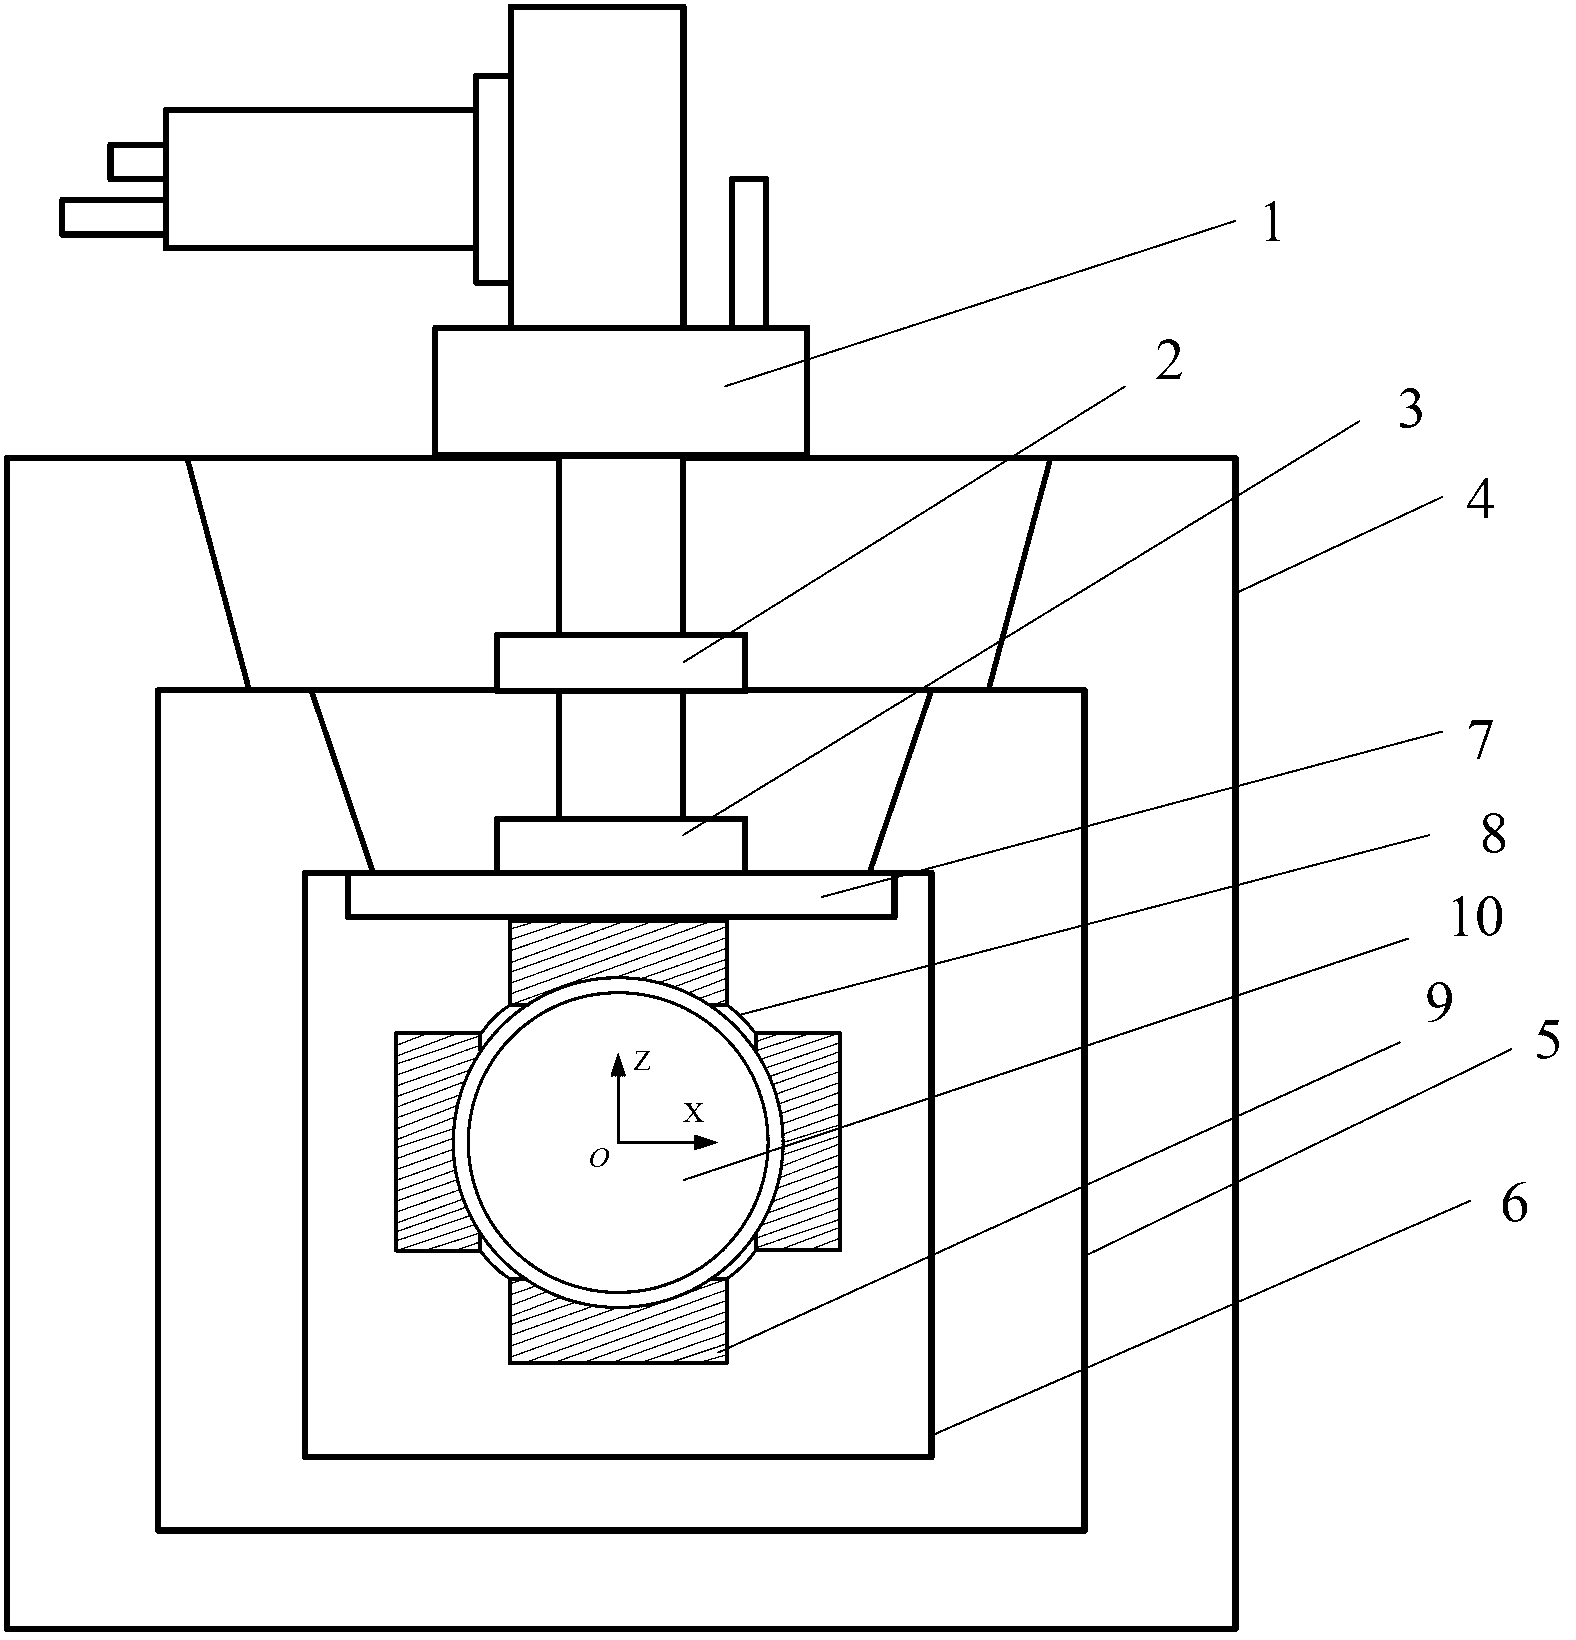 Superconducting magnetic levitation and static suspension mixing suspension supporting arrangement